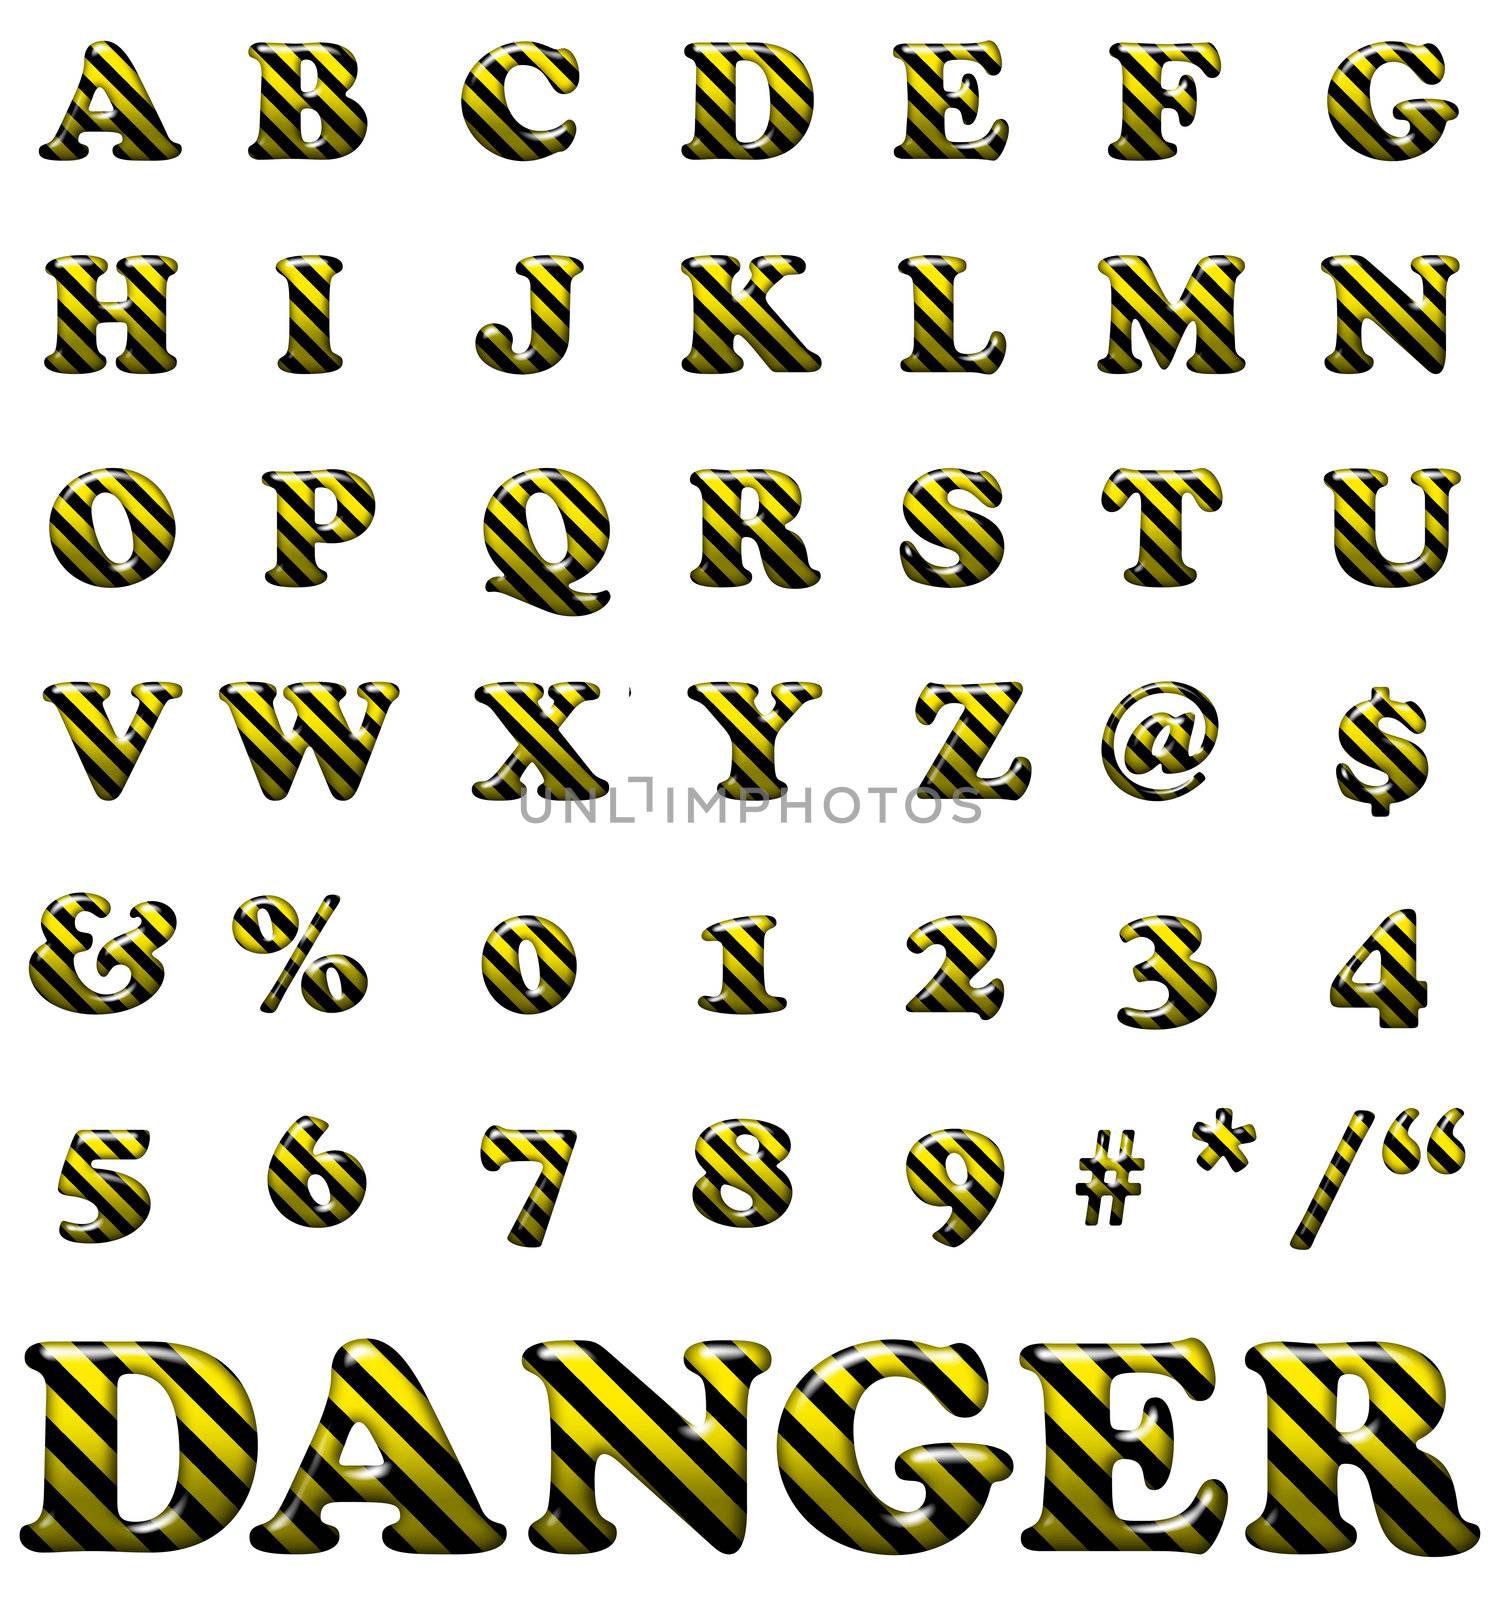 Exclusive collection letters with danger stripes on white background. Yellow and black illustrated danger letters.